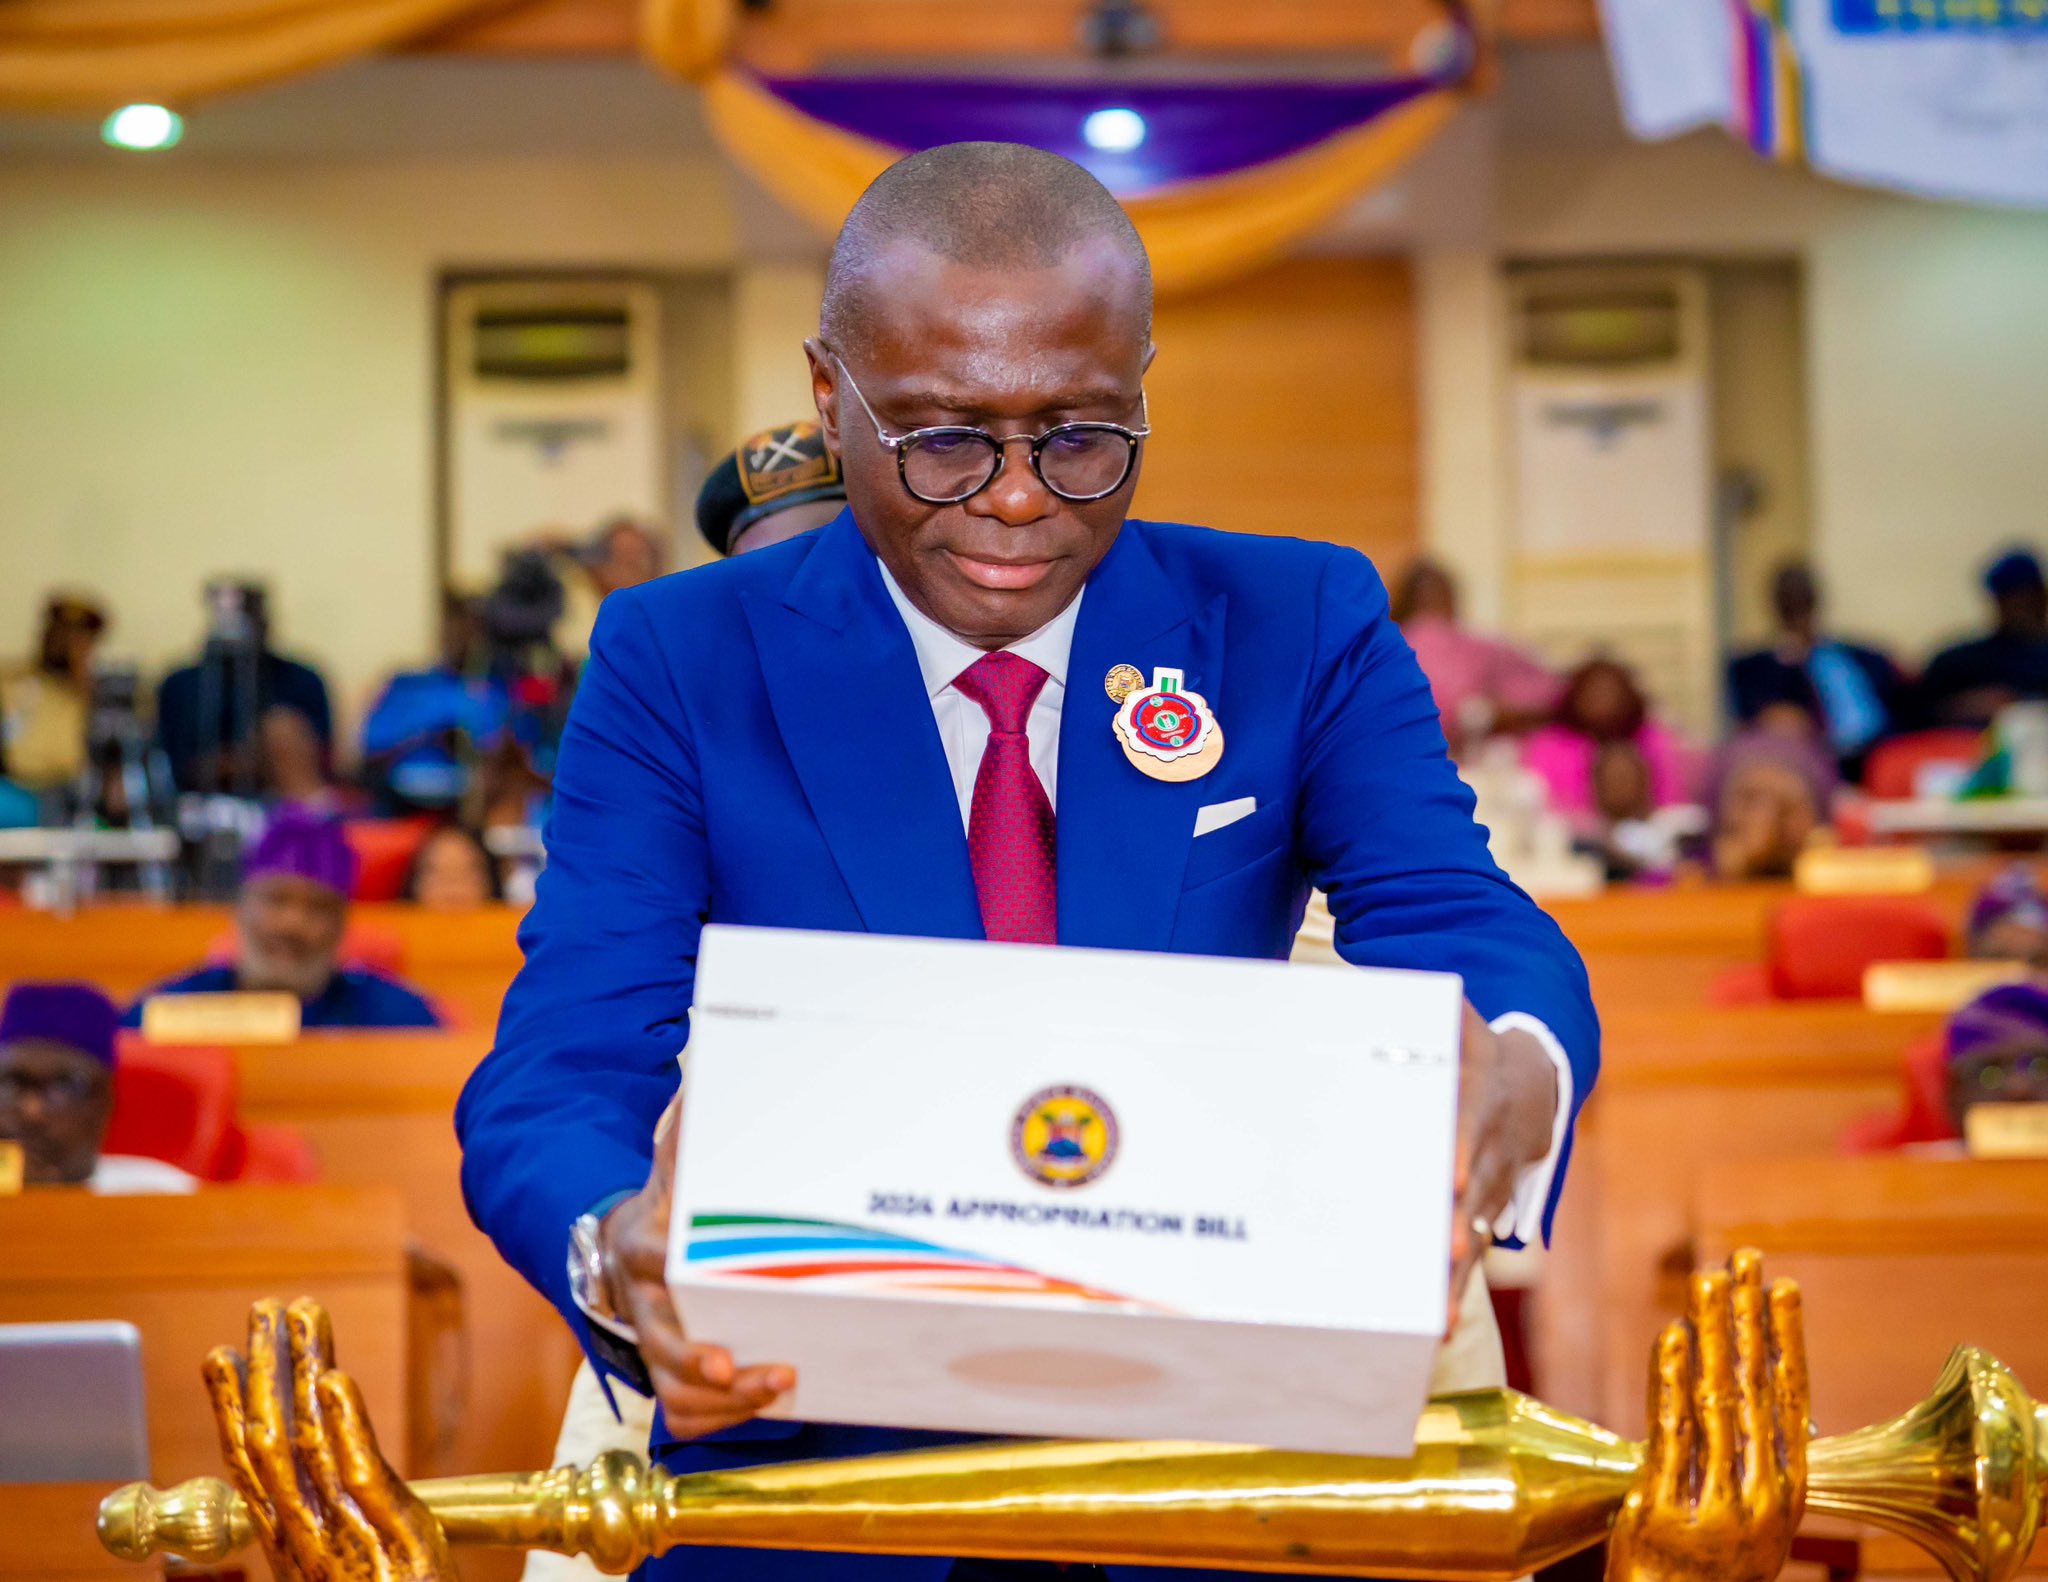 Infrastructure, education top as Sanwo-Olu presents N2.2trn budget to Assembly